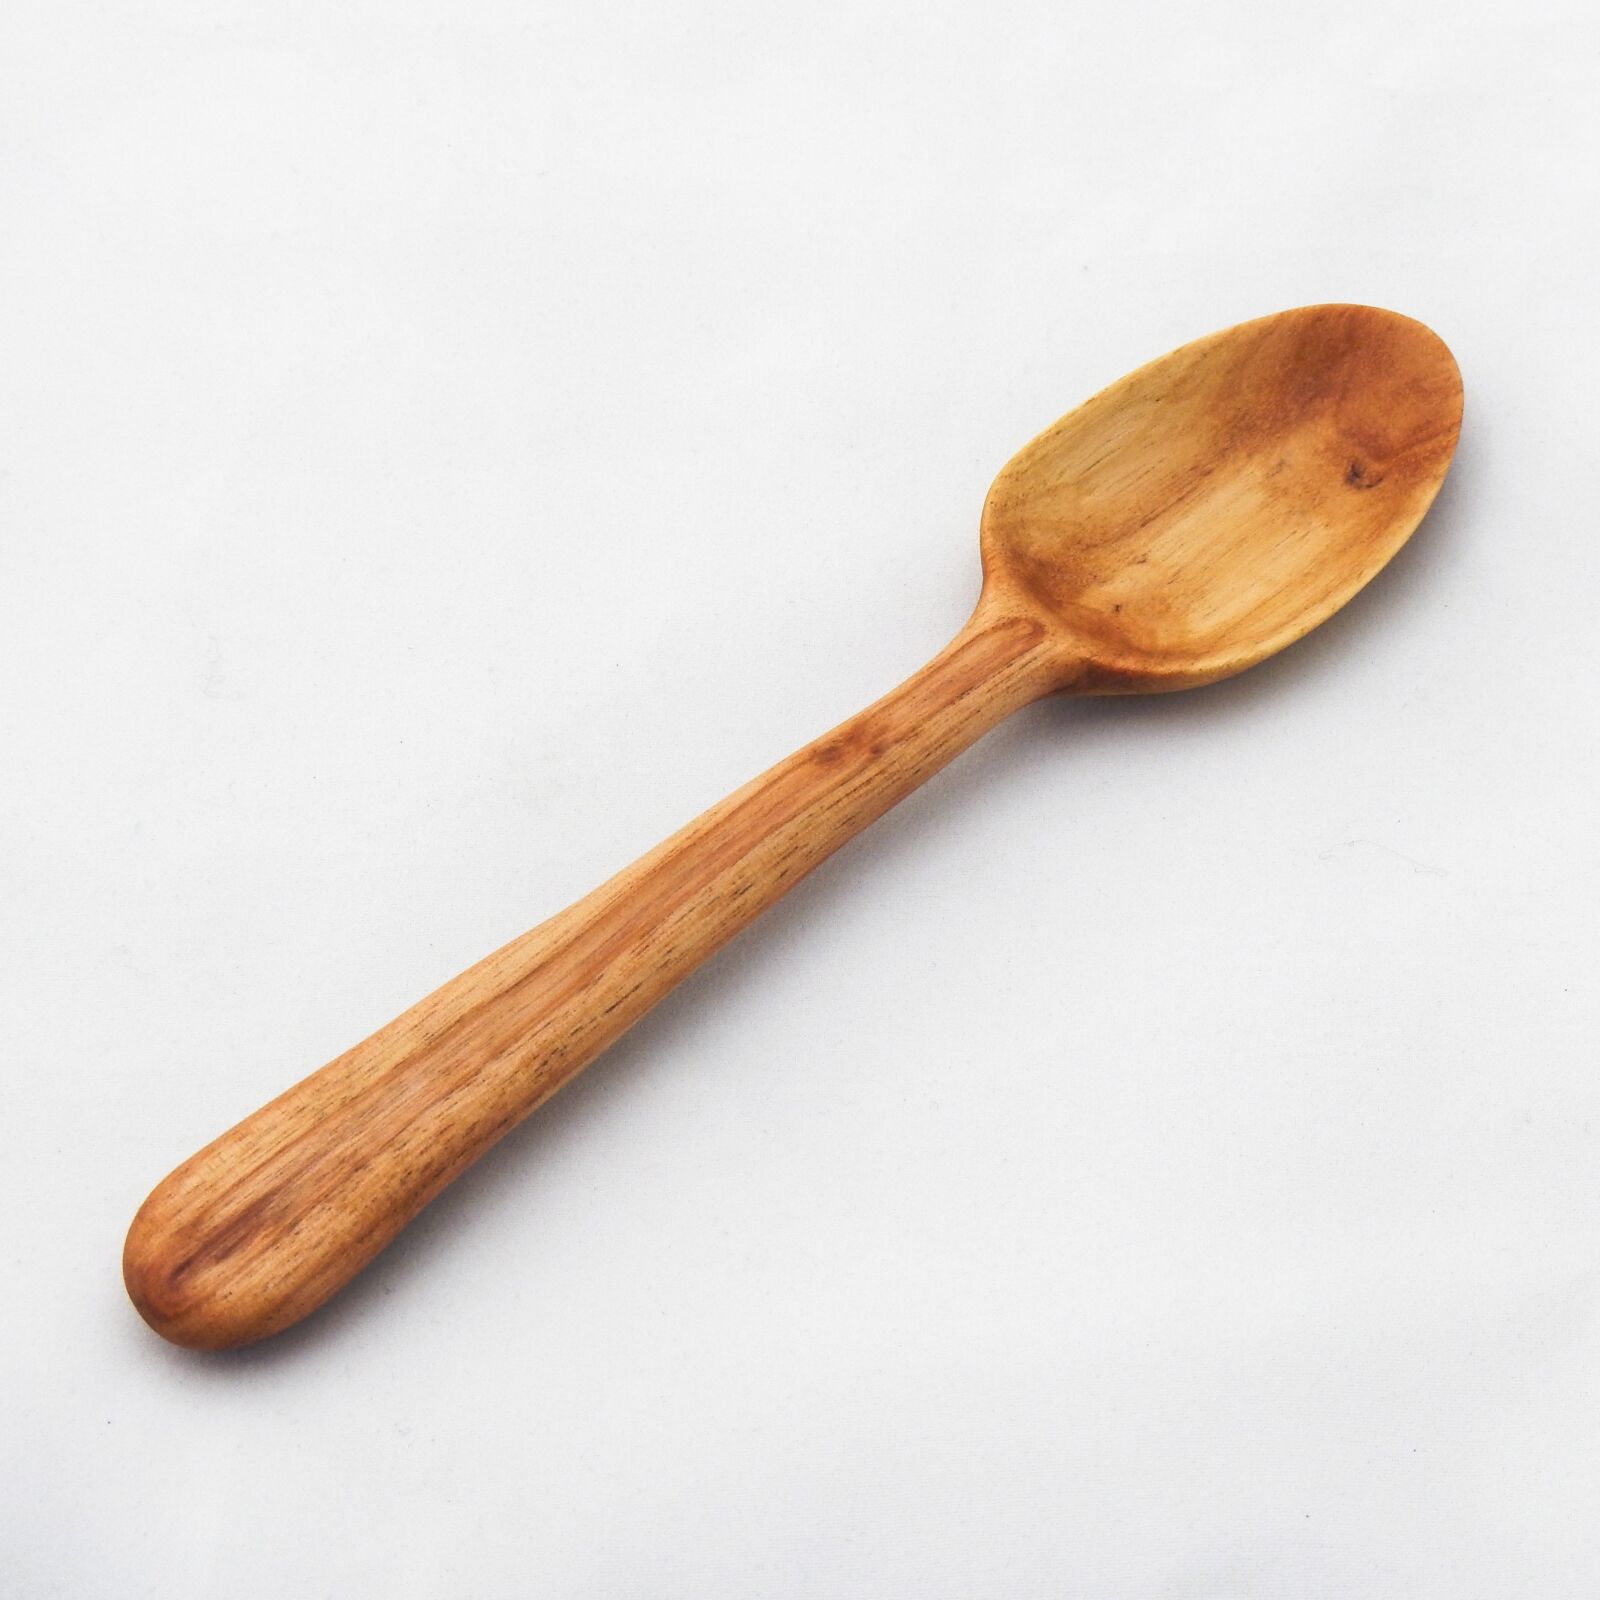 Nikon Coolpix AW110 sample photo. Spoon, carved spoon, wooden photography